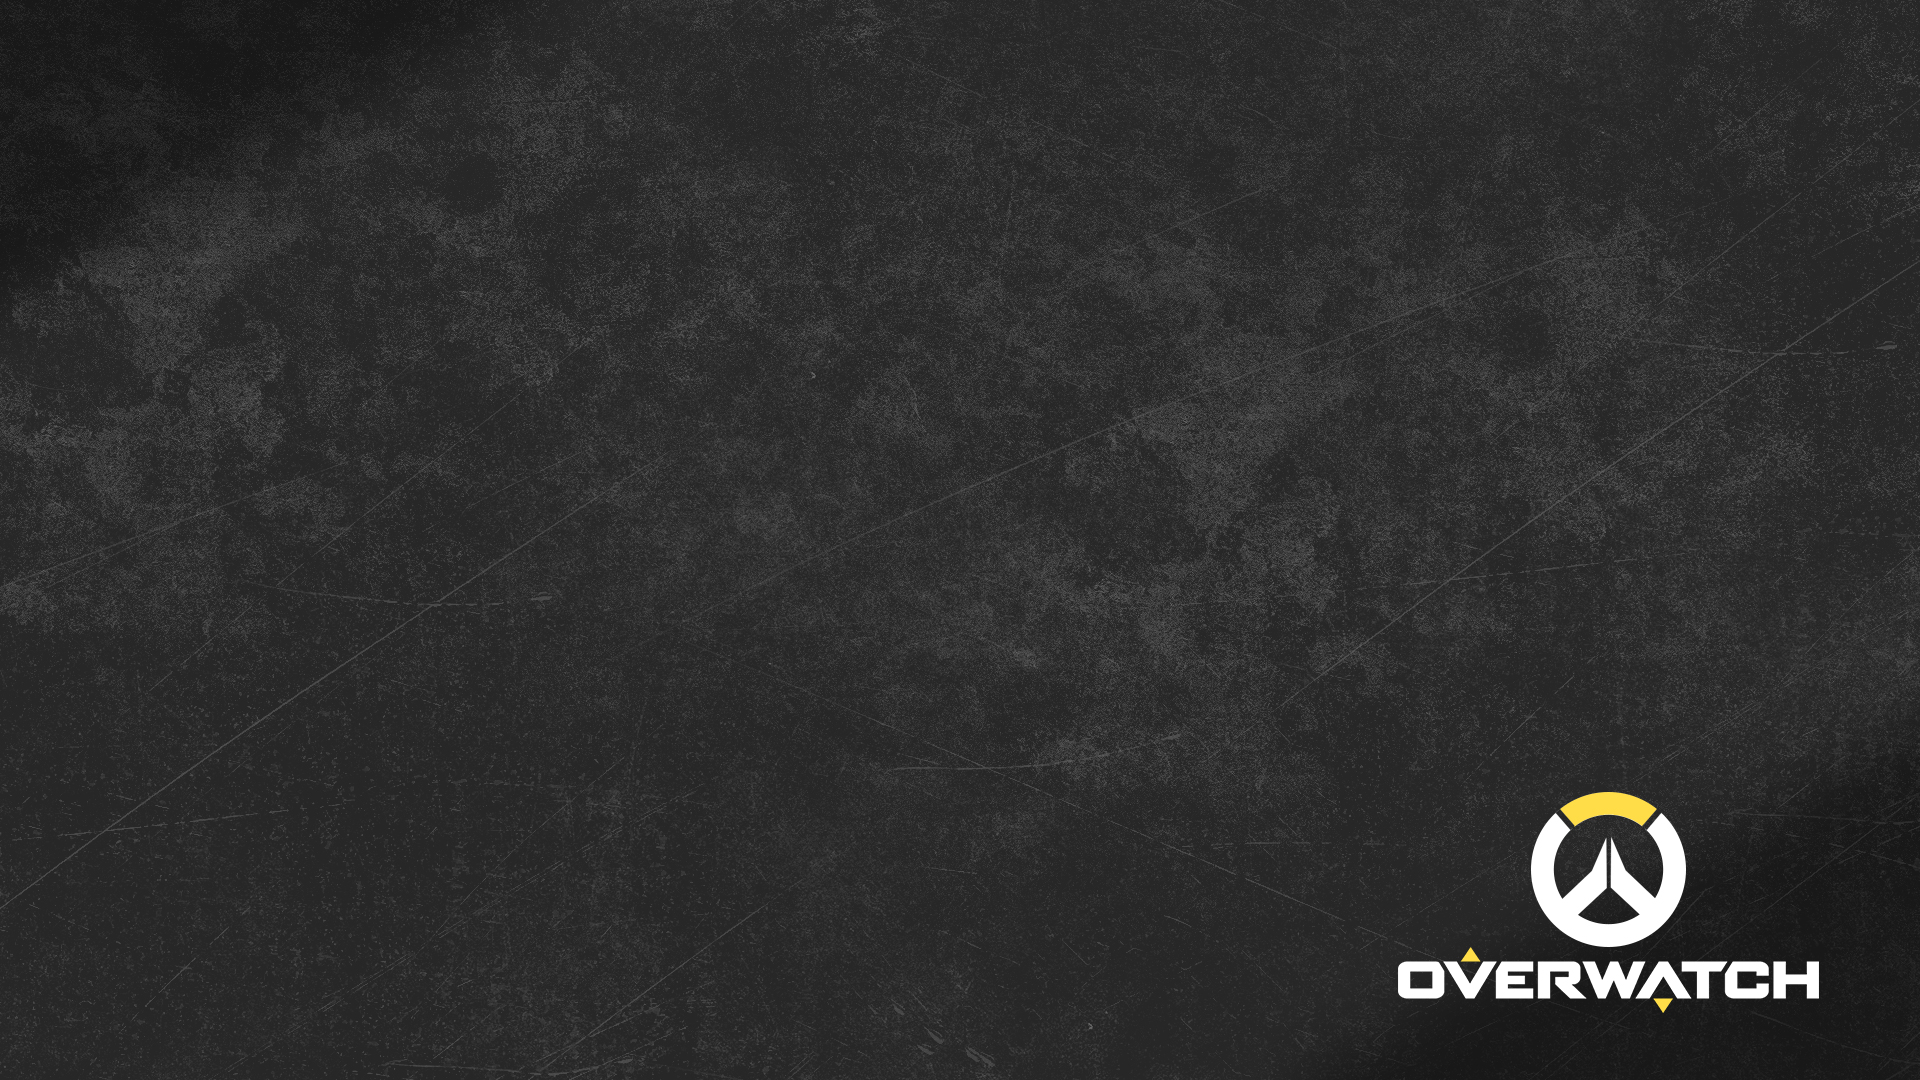 Overwatch Wallpapers Pictures Images HD Wallpapers Download Free Images Wallpaper [wallpaper981.blogspot.com]